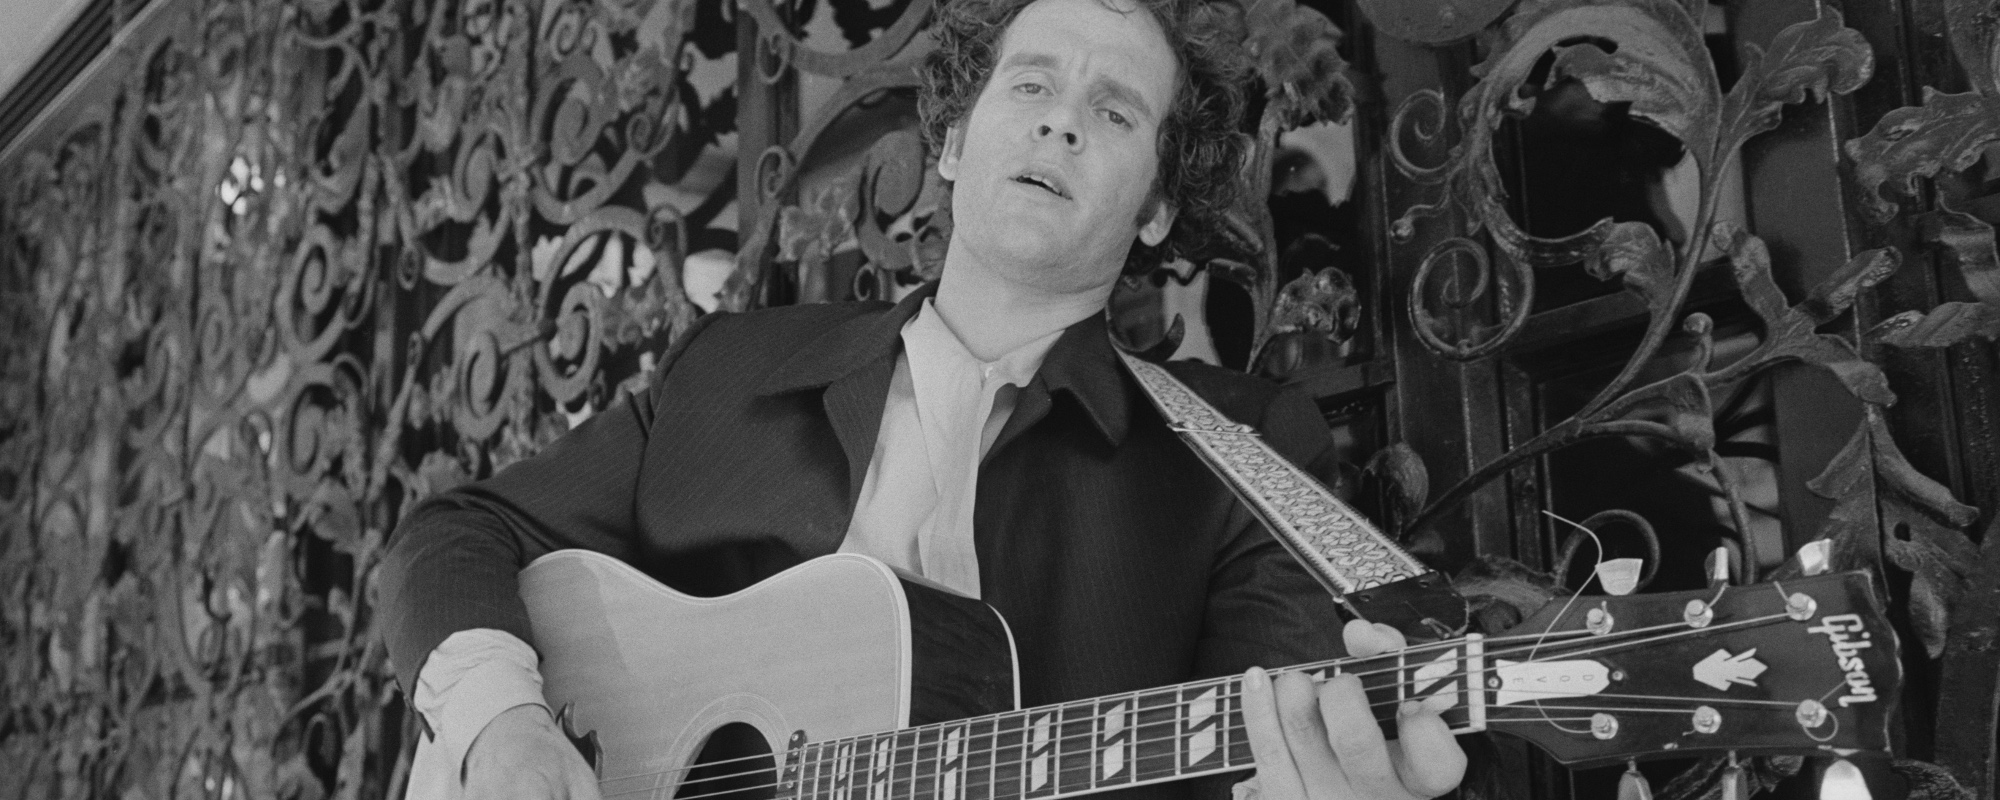 Behind The Song: Tim Hardin, “Reason To Believe”